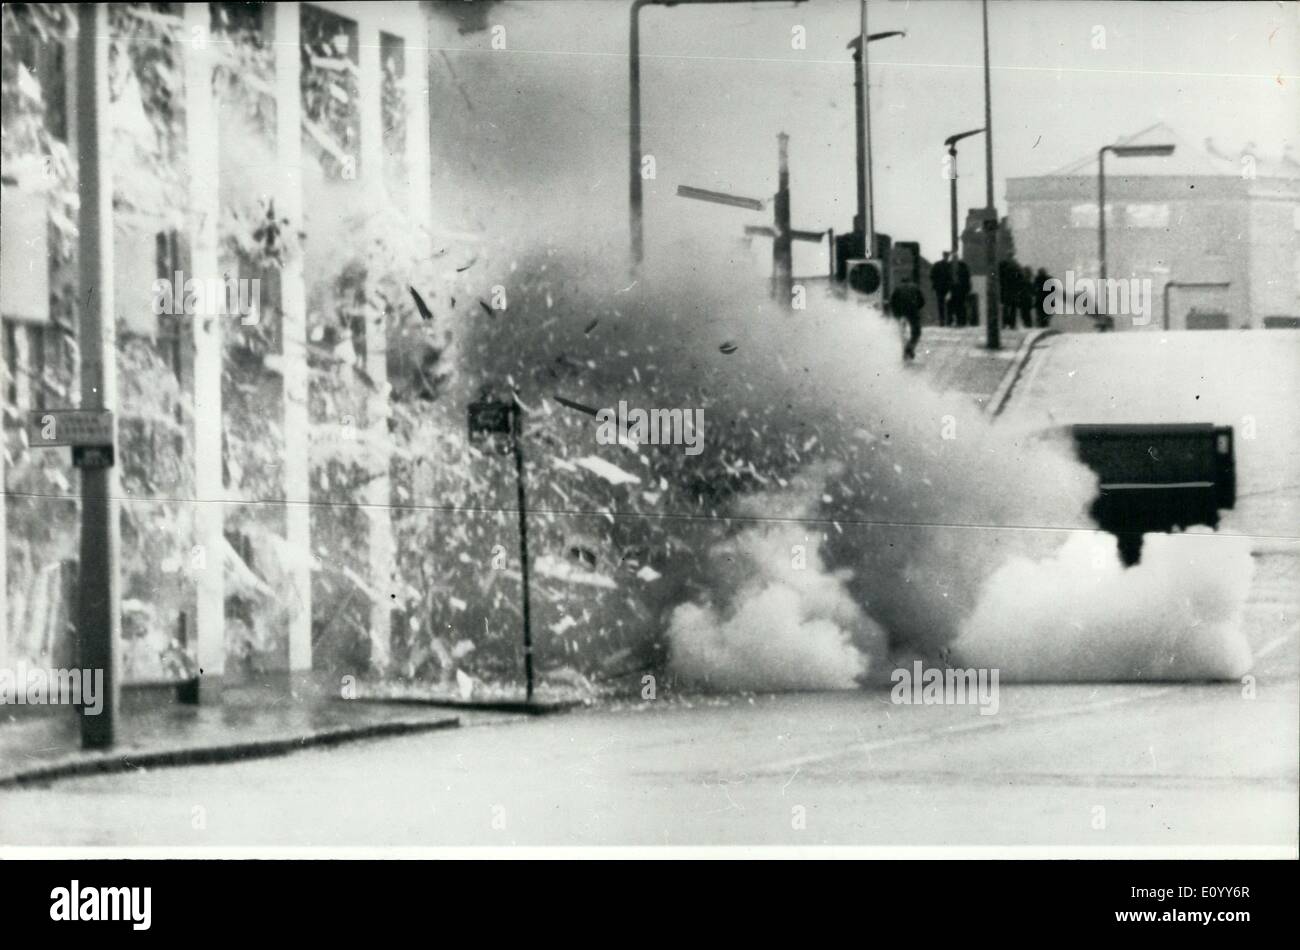 Nov. 11, 1971 - Moment of Detonation In Belfast. The moment of detonation as a terrorist bomb explodes, blowing out the front of car showroom near the centre of Belfast yesterday. The explosion occurred after troops had a laid a small gelignite charge designed to force off the top of the bomb. Stock Photo